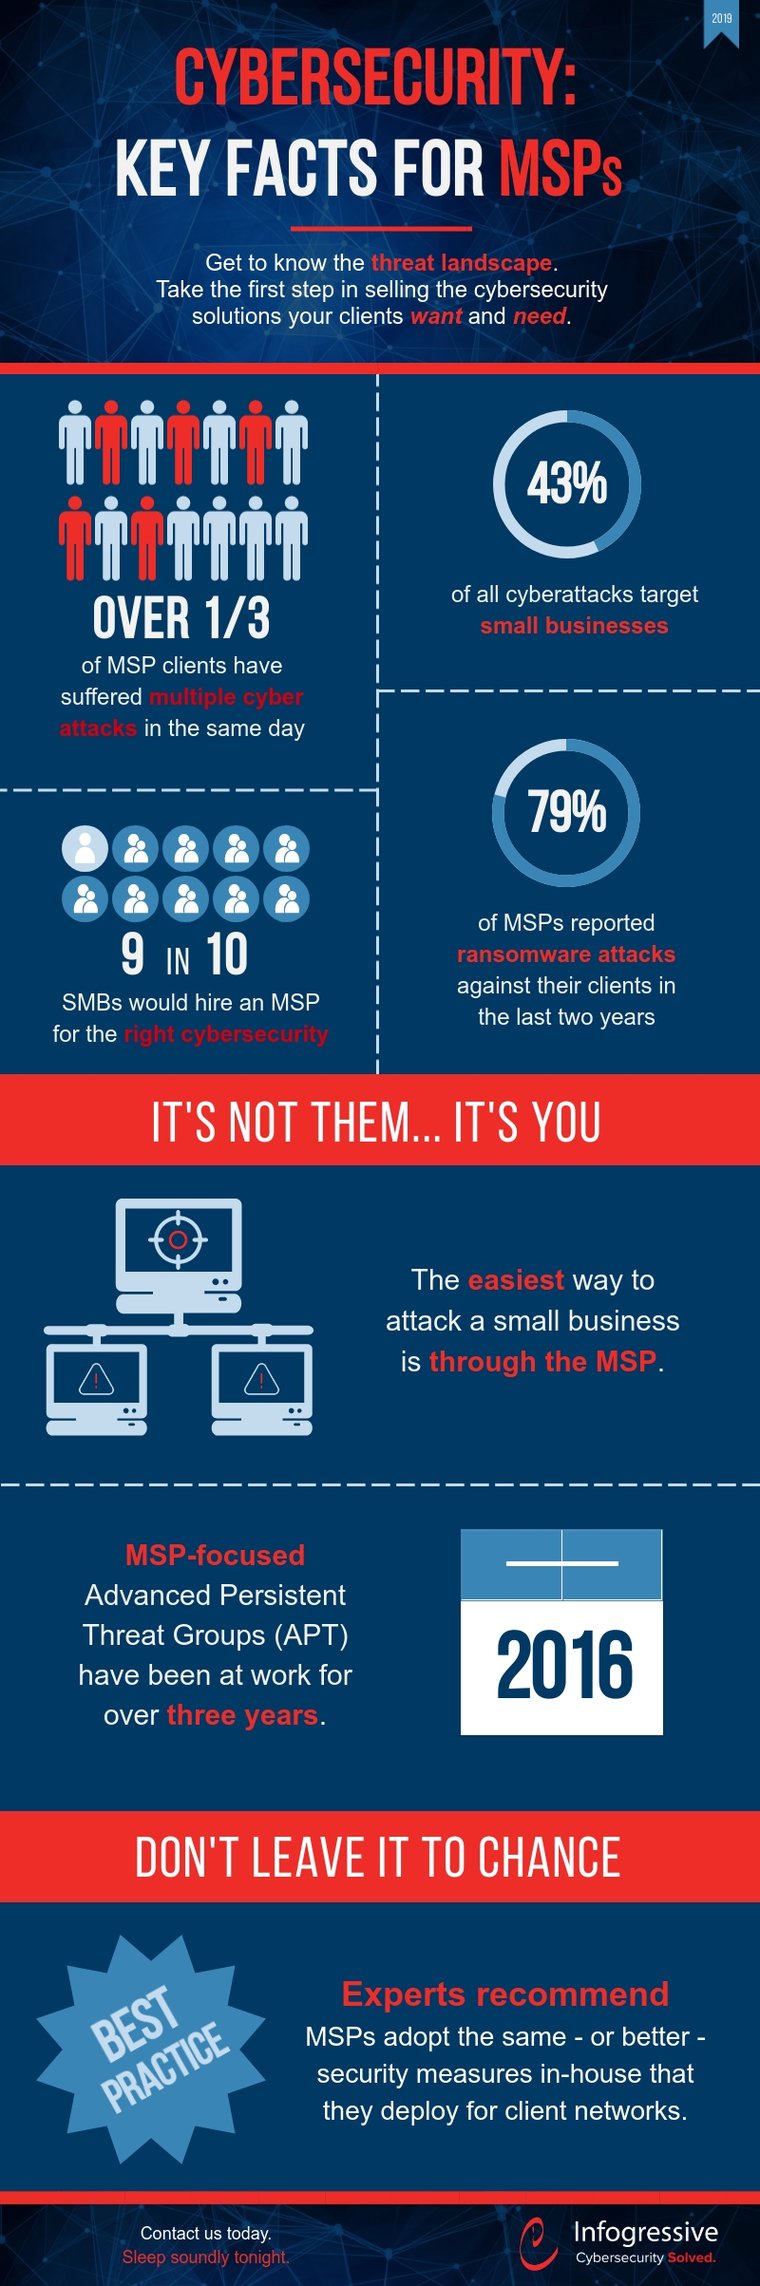 key cybersecurity statistics for MSPs